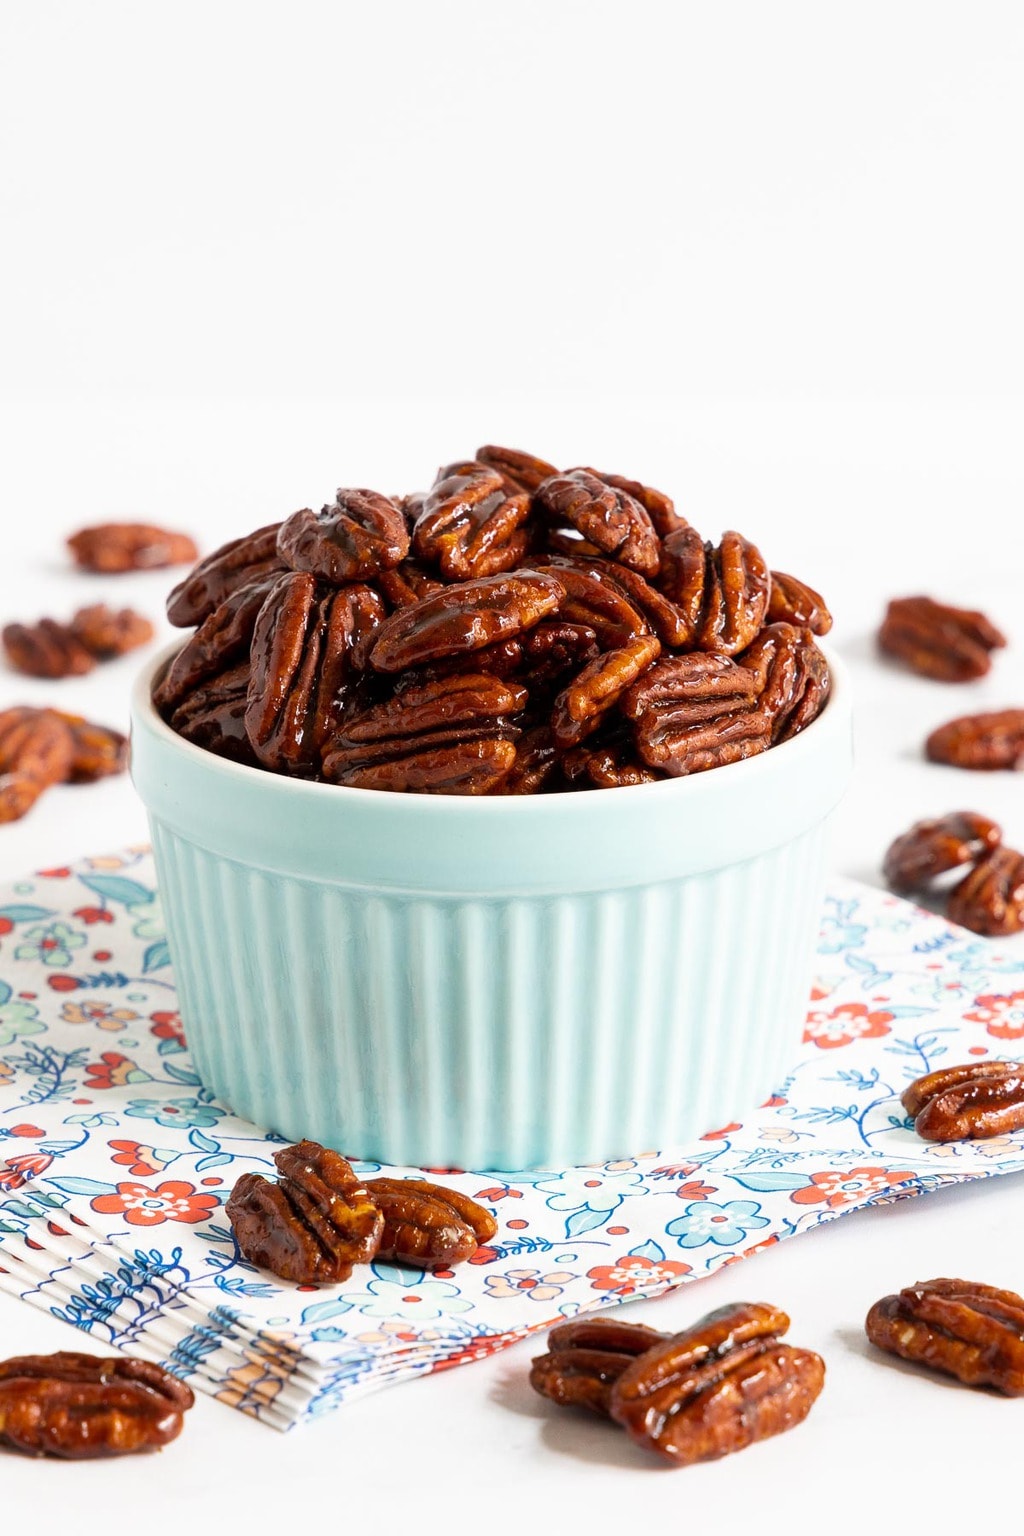 Vertical closeup photo of a batch of Southwest Sweet and Spicy Glazed Pecans in a pale blue ramekin.